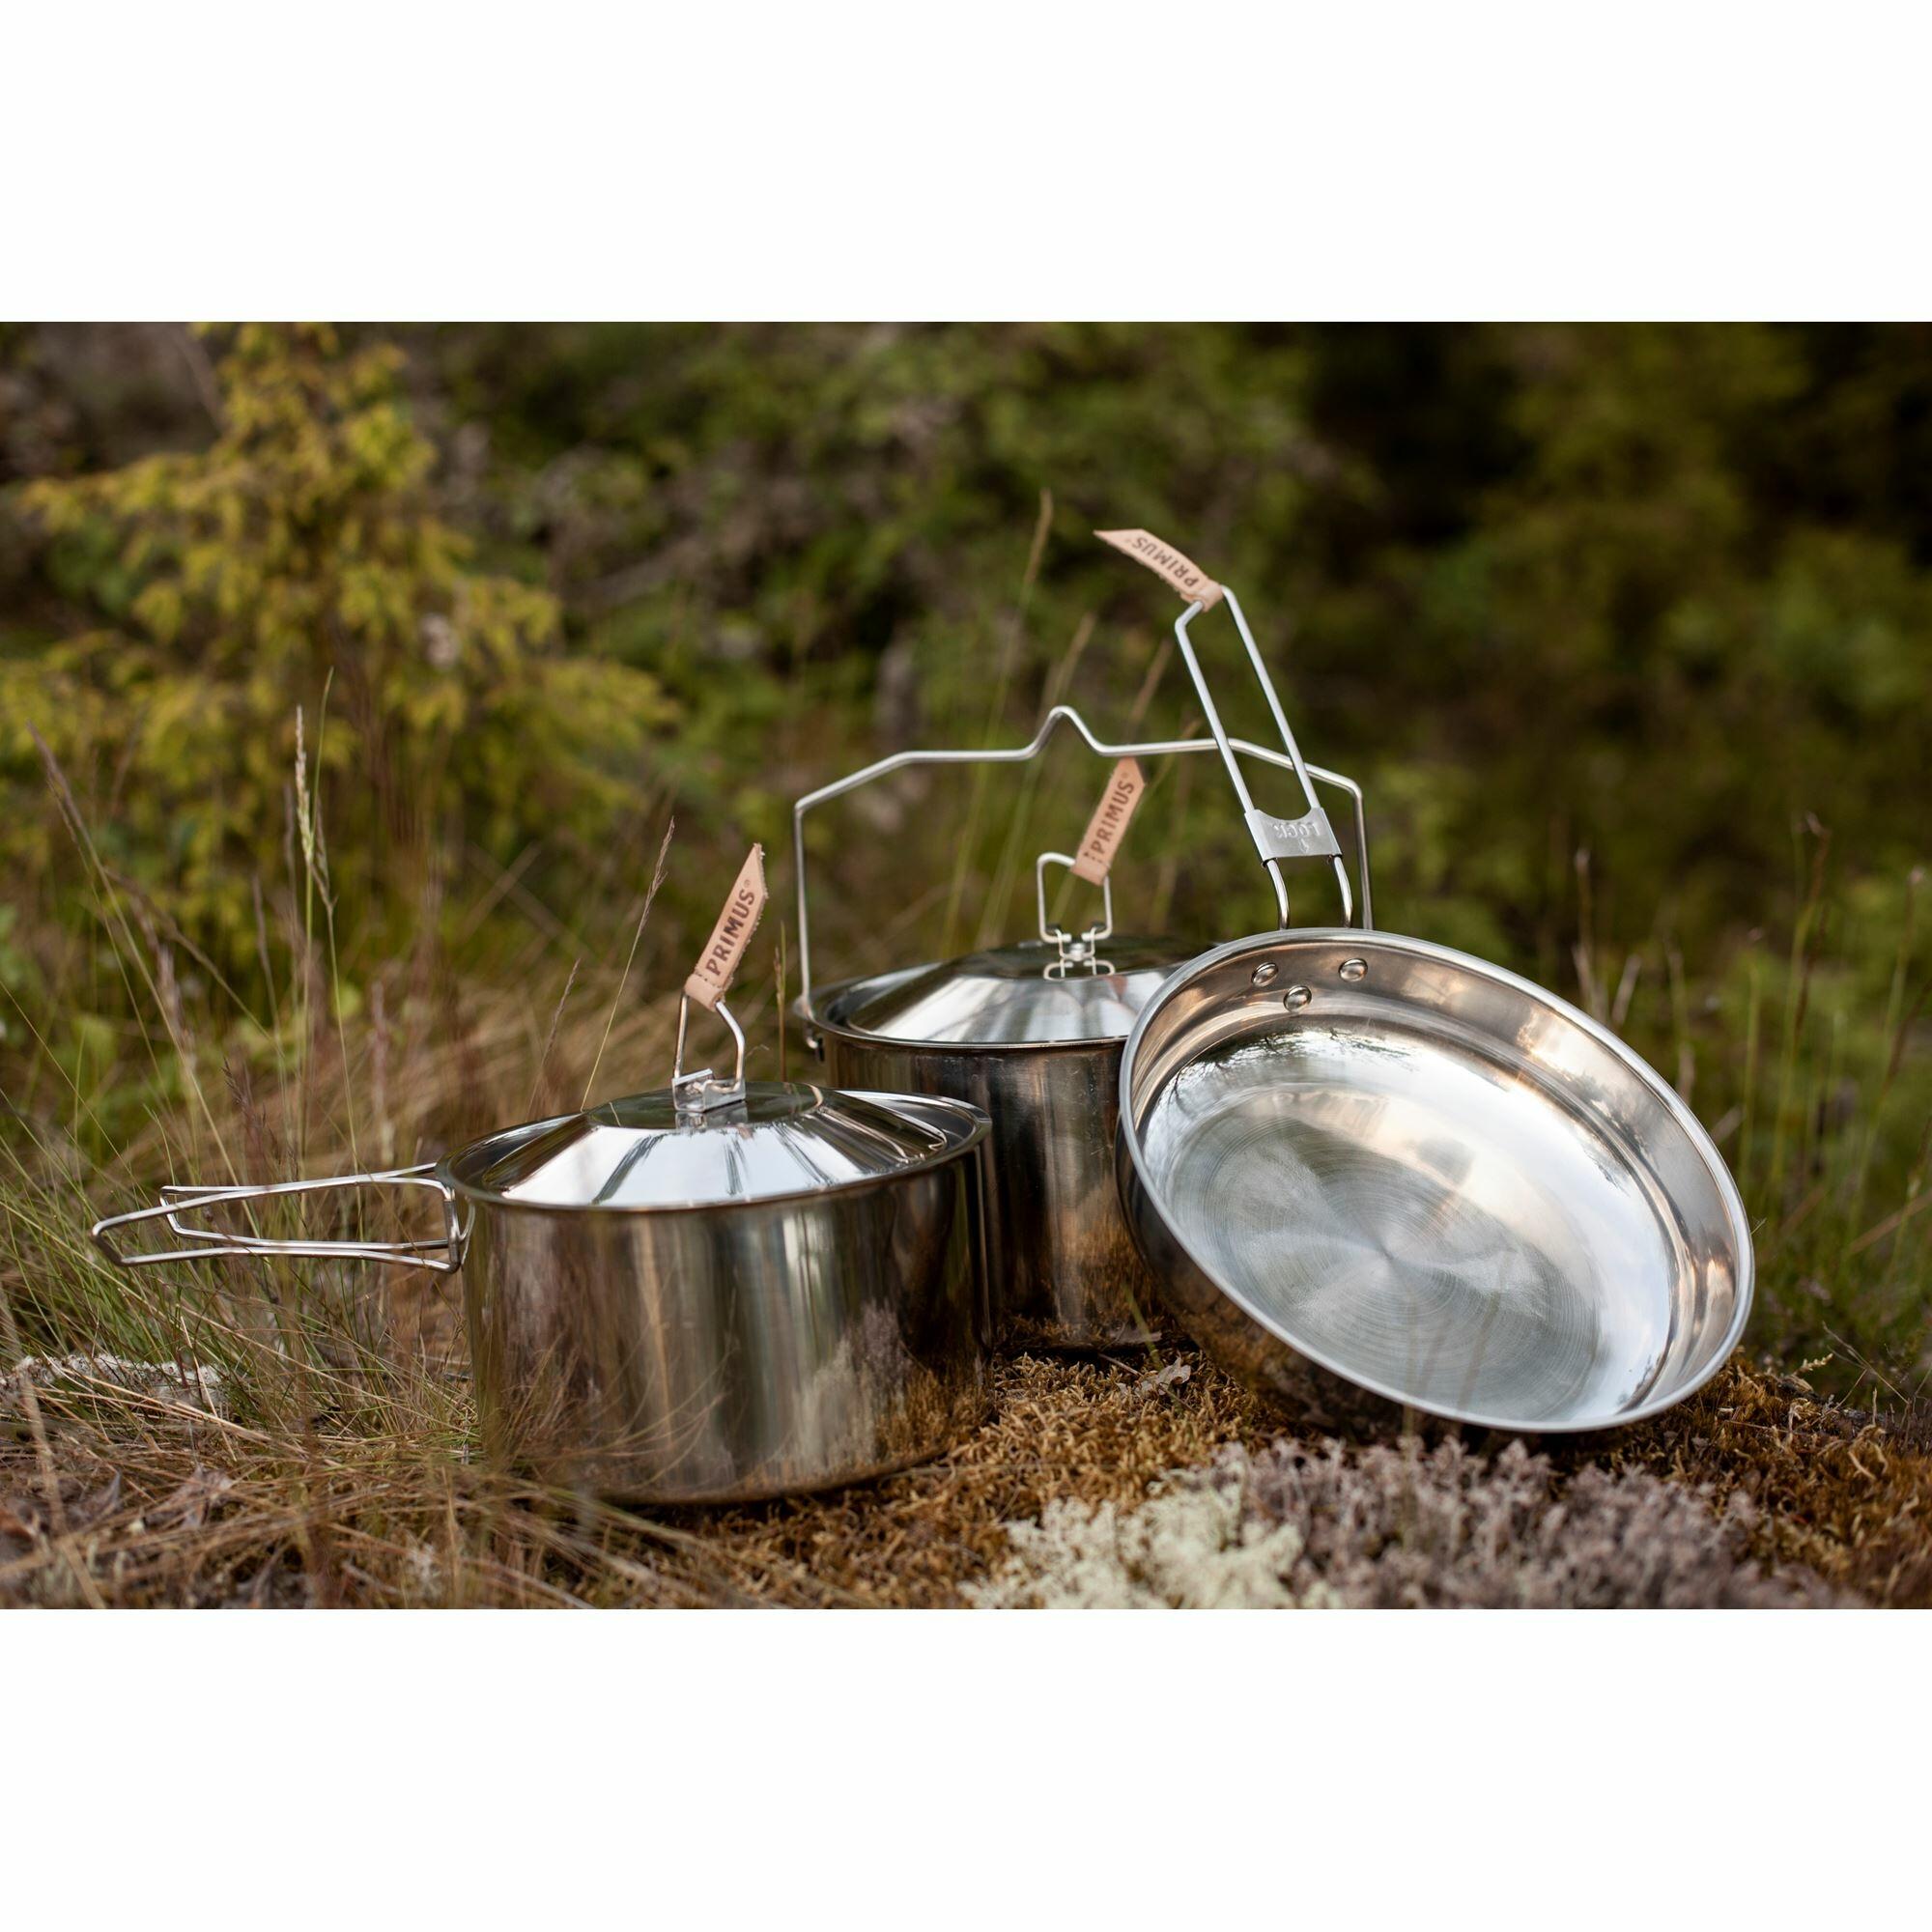 CampFire Stainless Steel 3 Piece Cookset 2/3